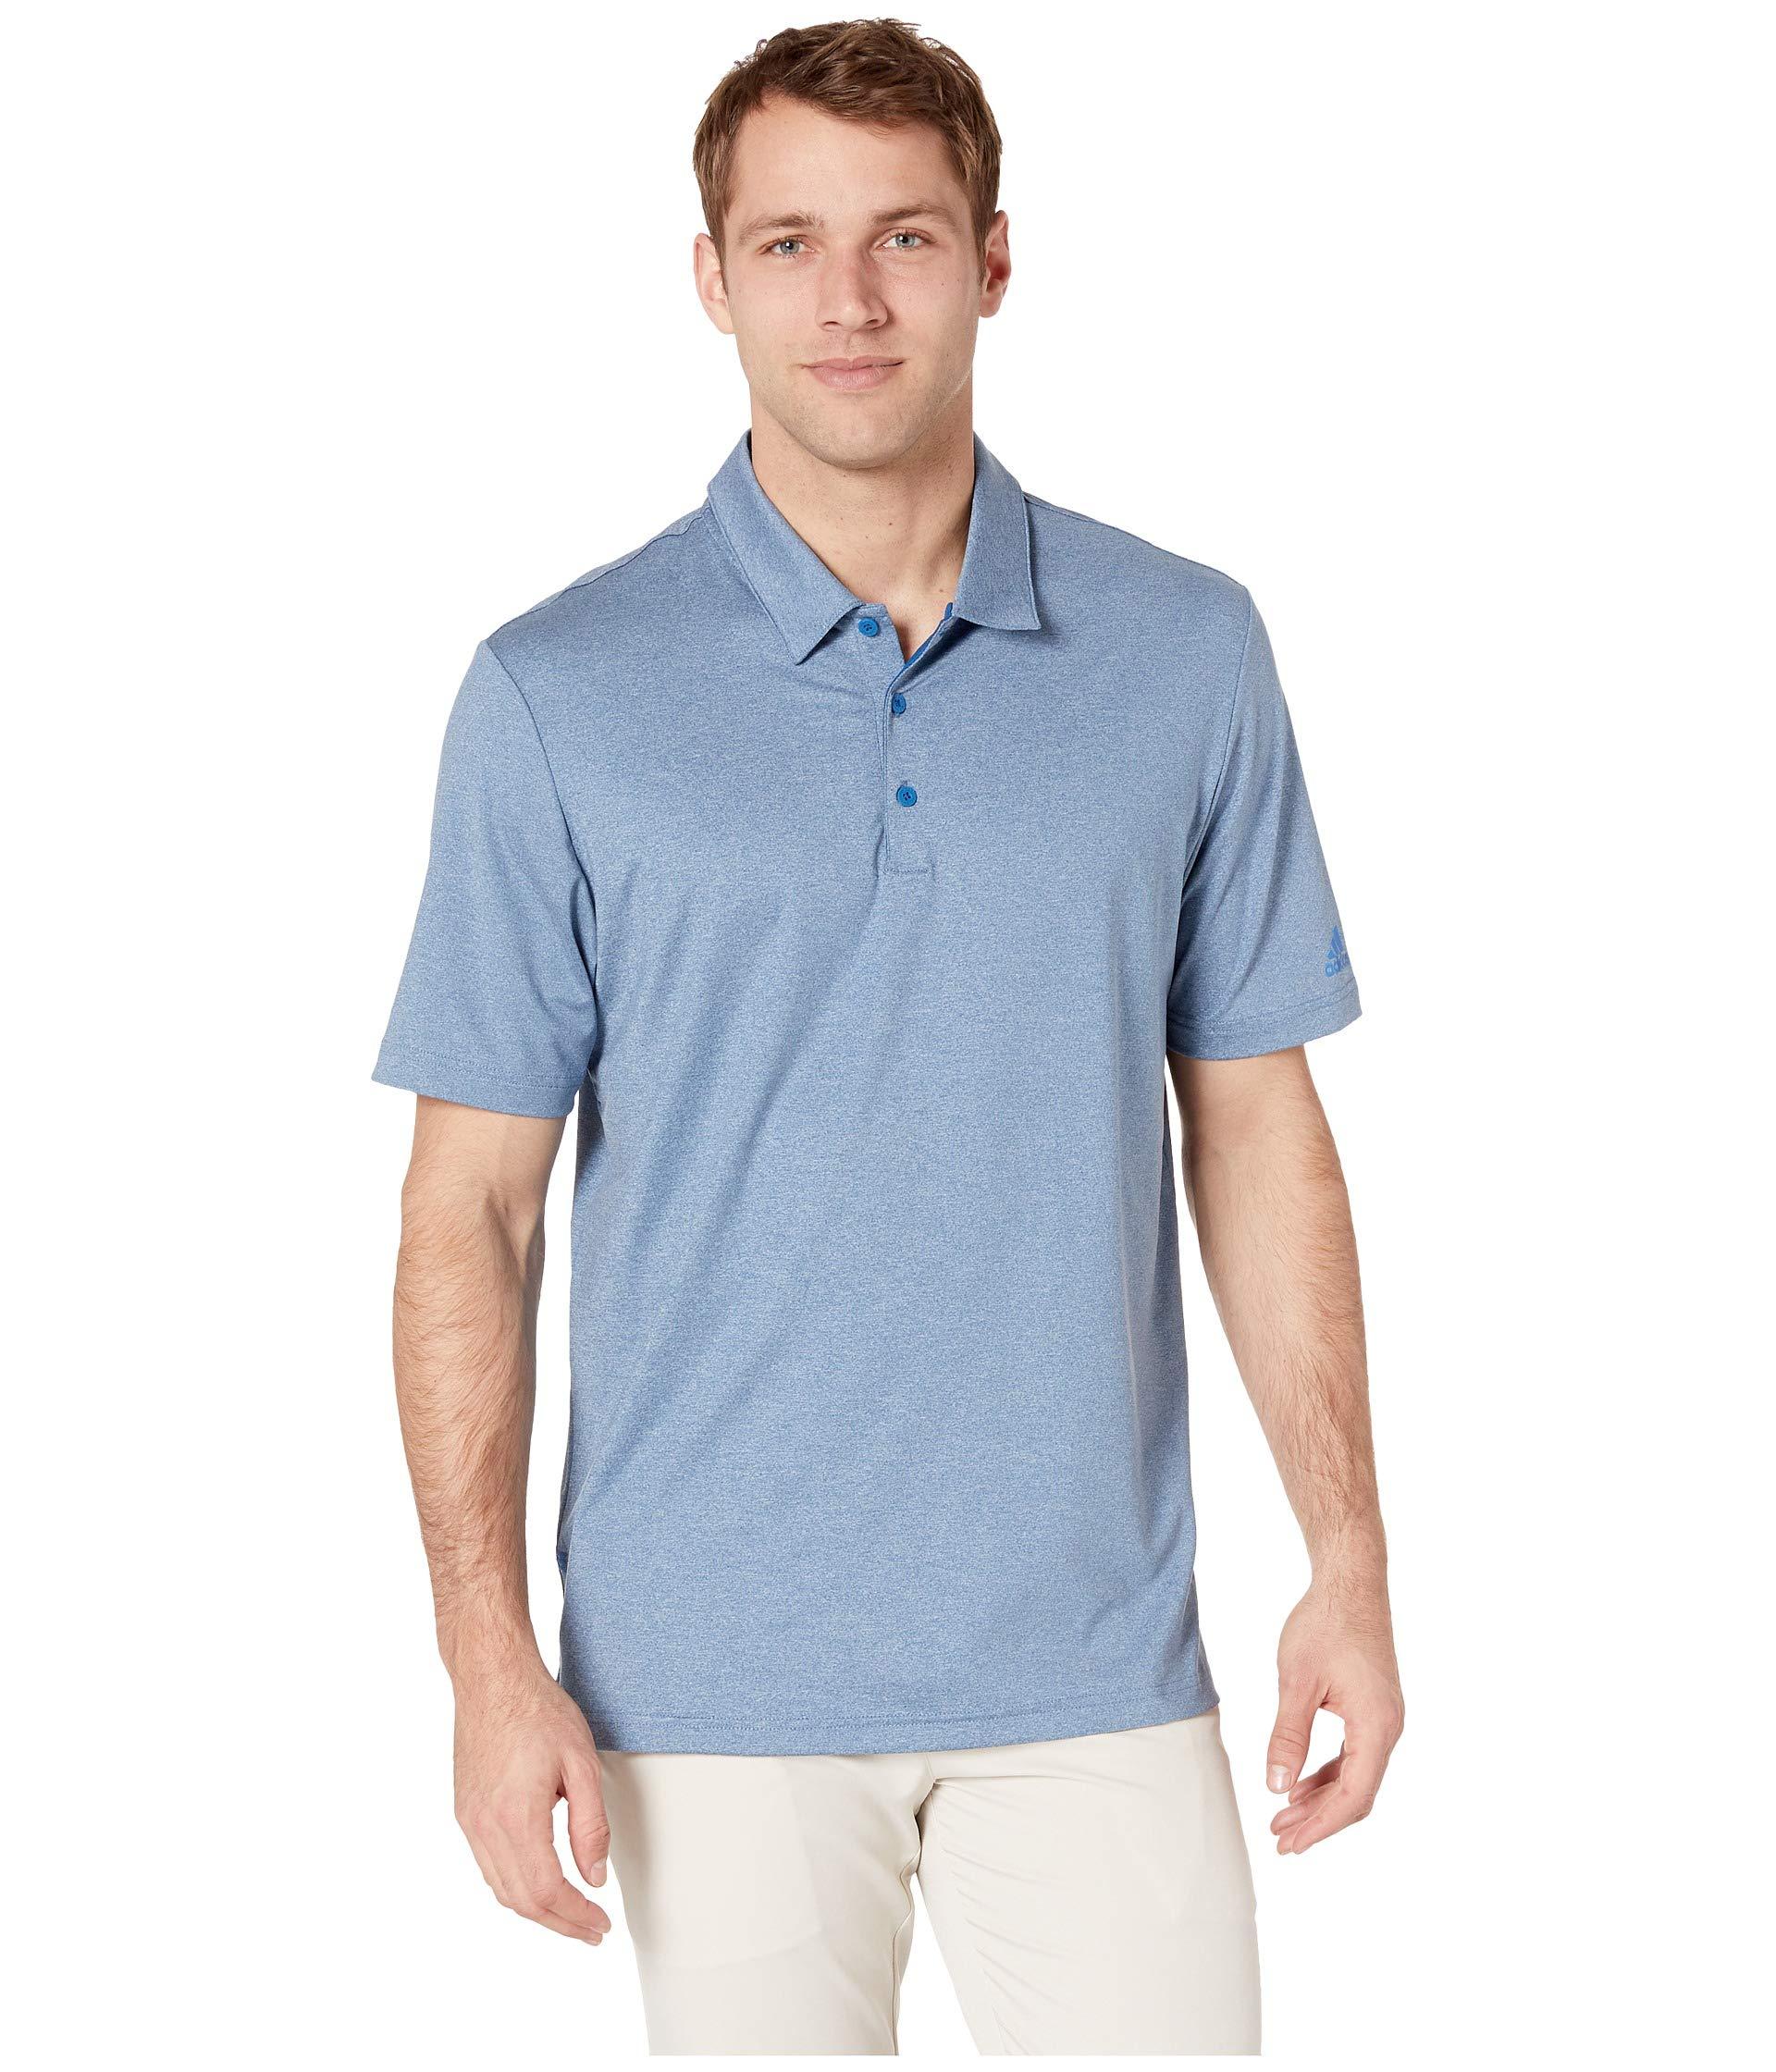 adidas Originals Ultimate Heather Polo in Blue for Men - Lyst